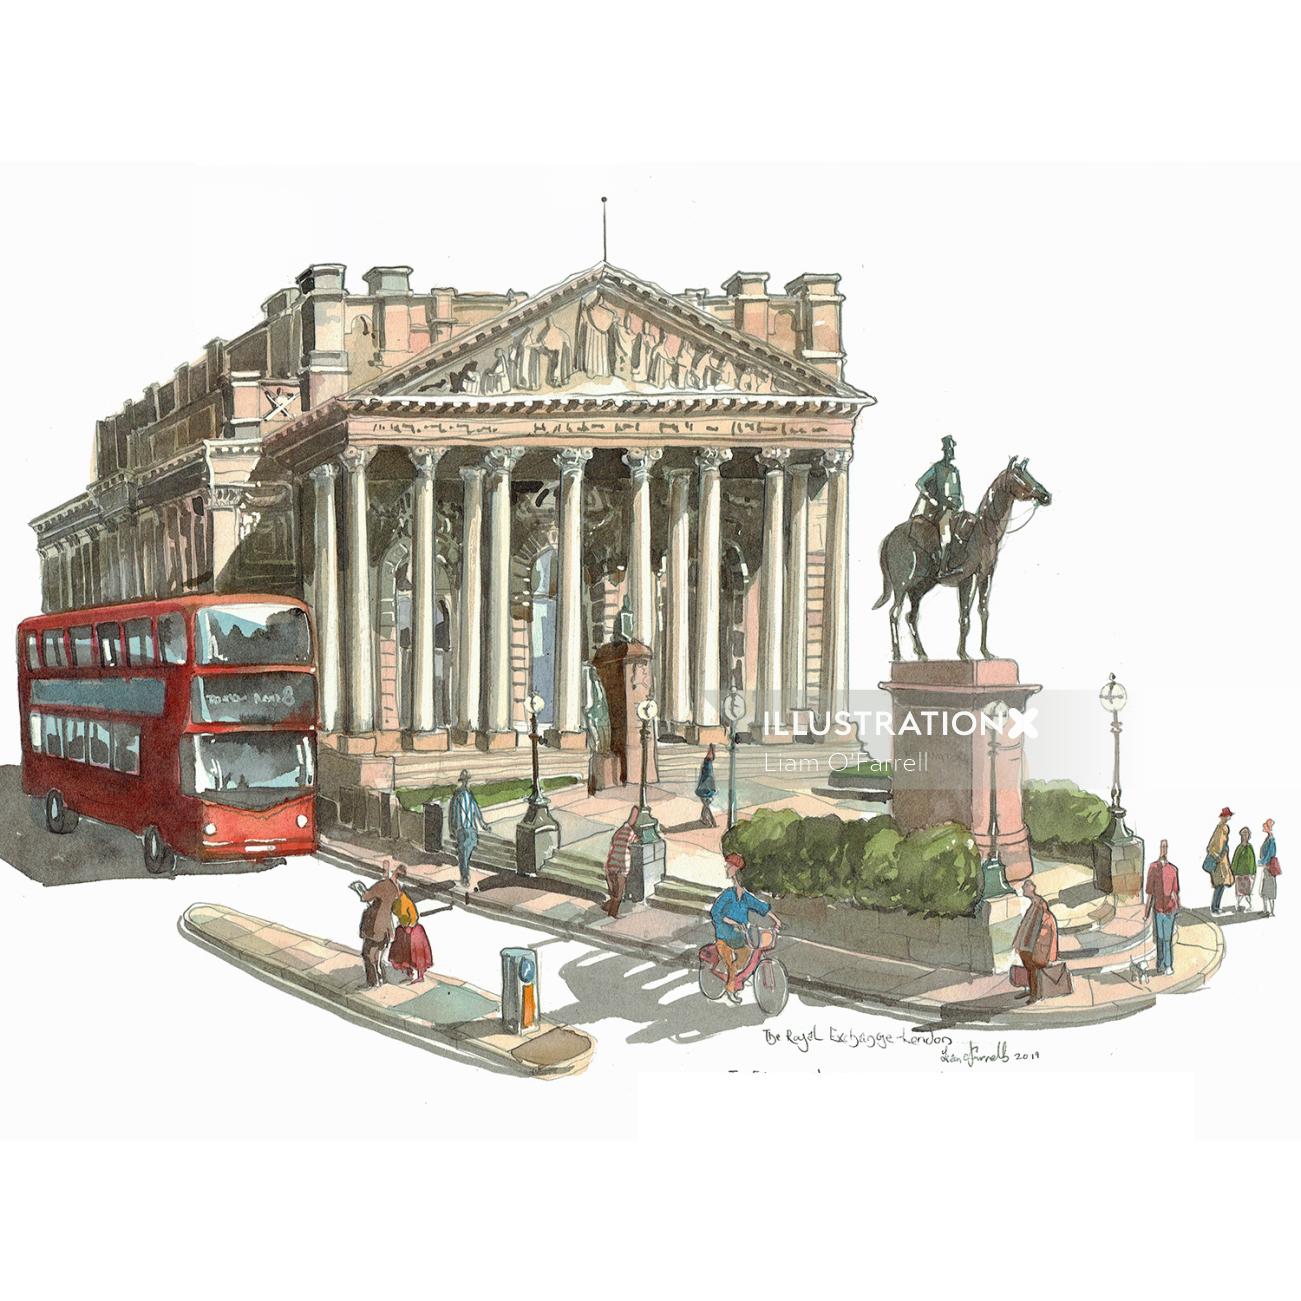 A painting of the Royal Exchange in London